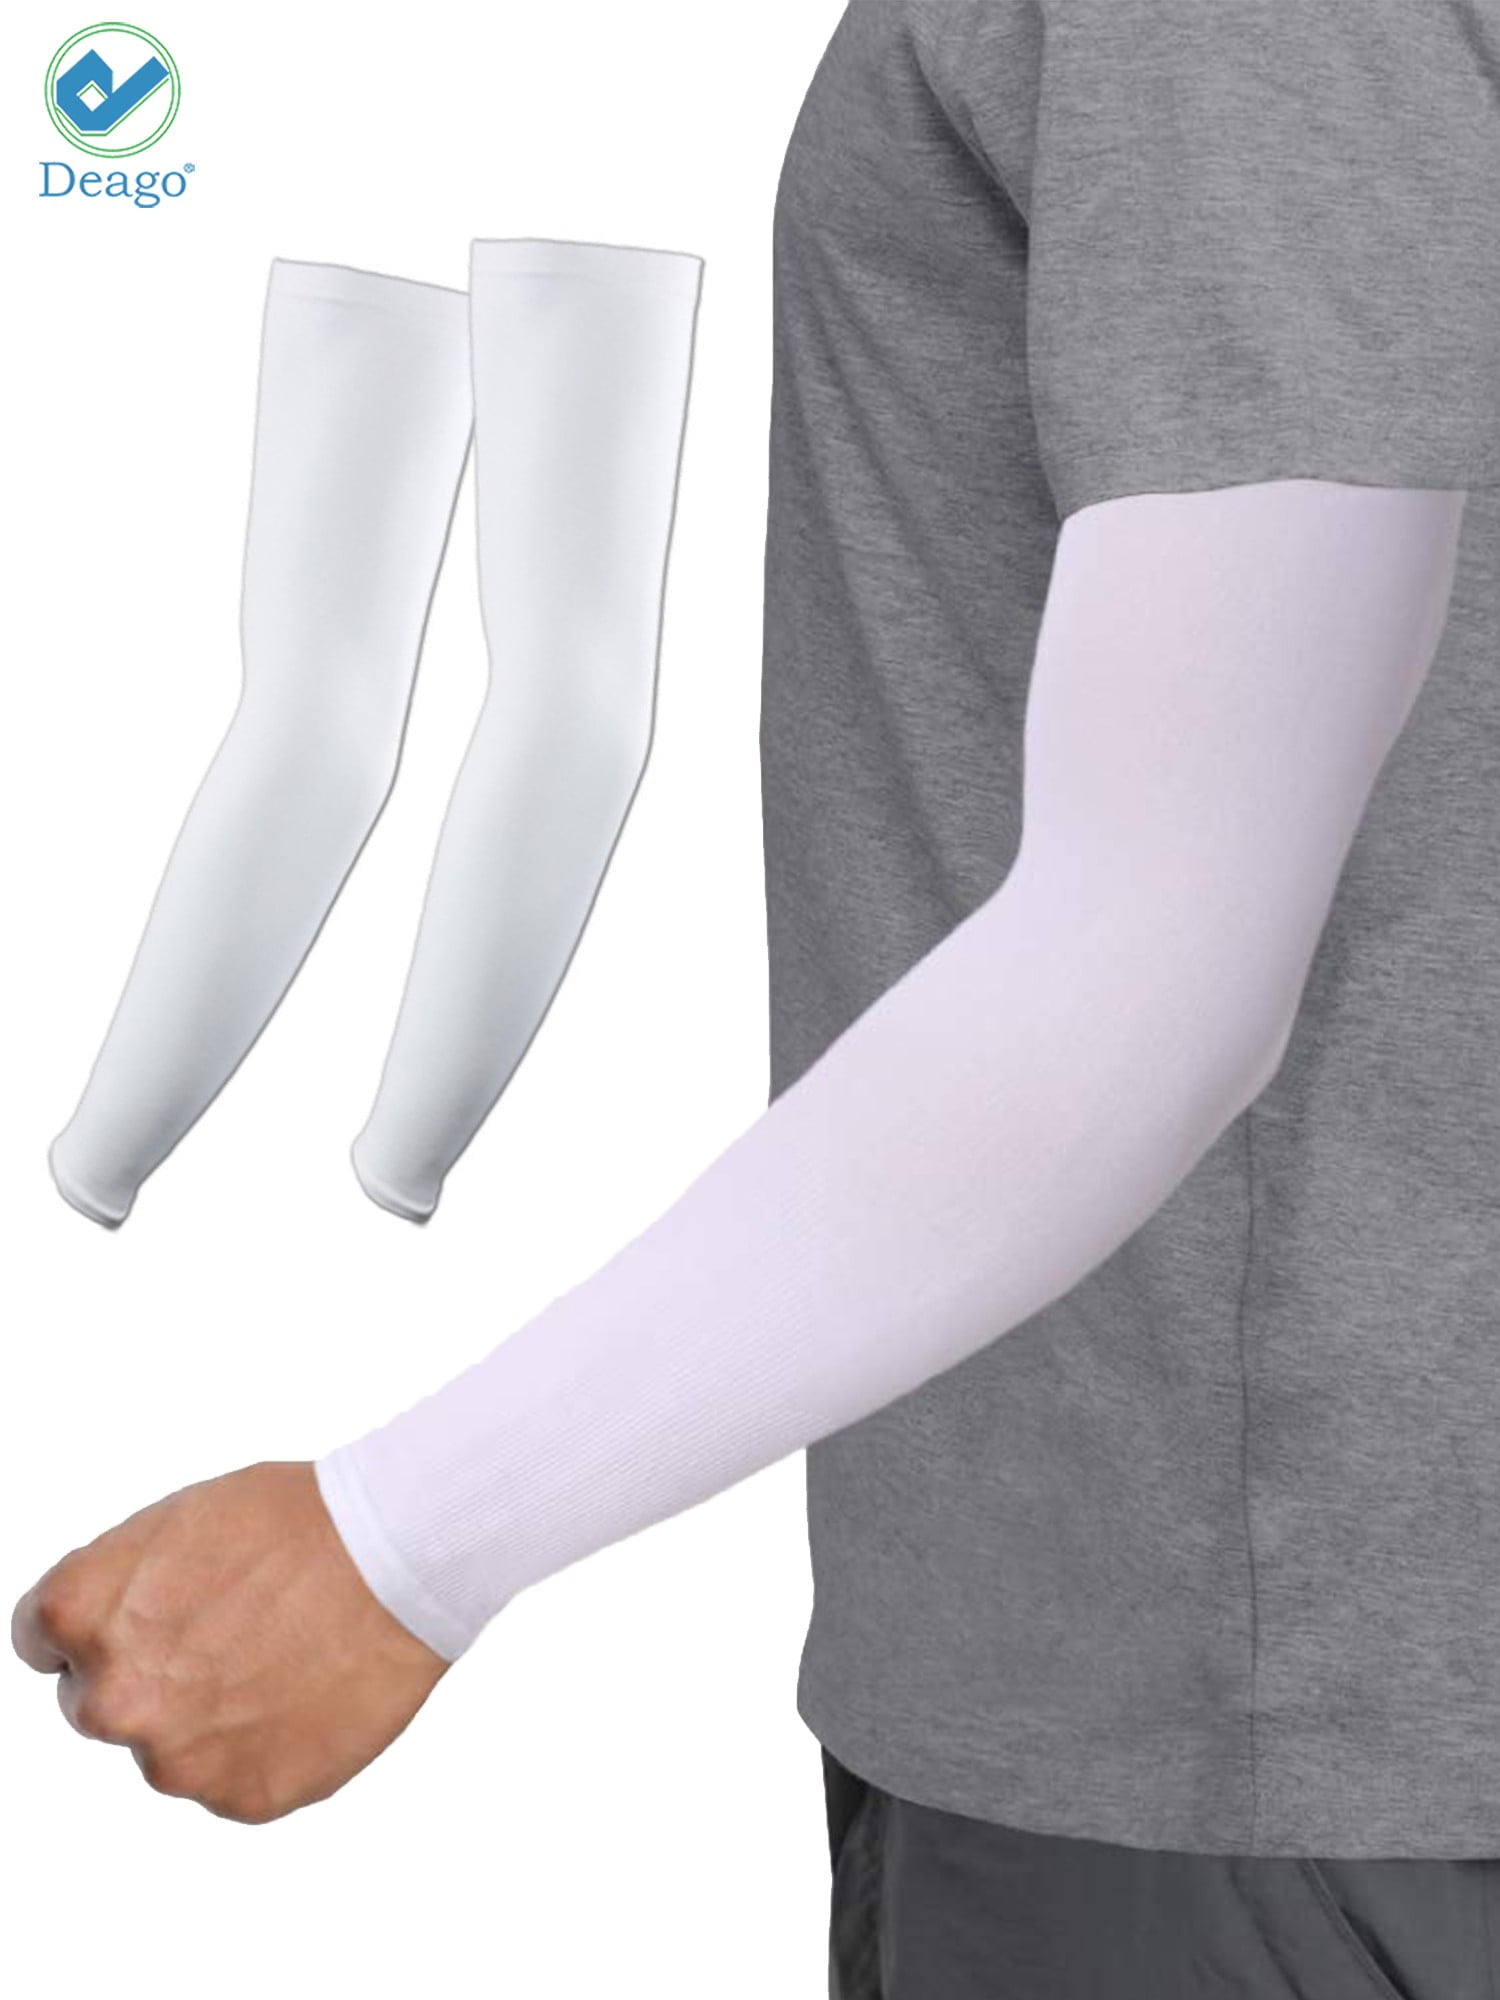 UV Sun Elbow Protection.For Sports Cooling Compression Arm Sleeves NEW 2019 